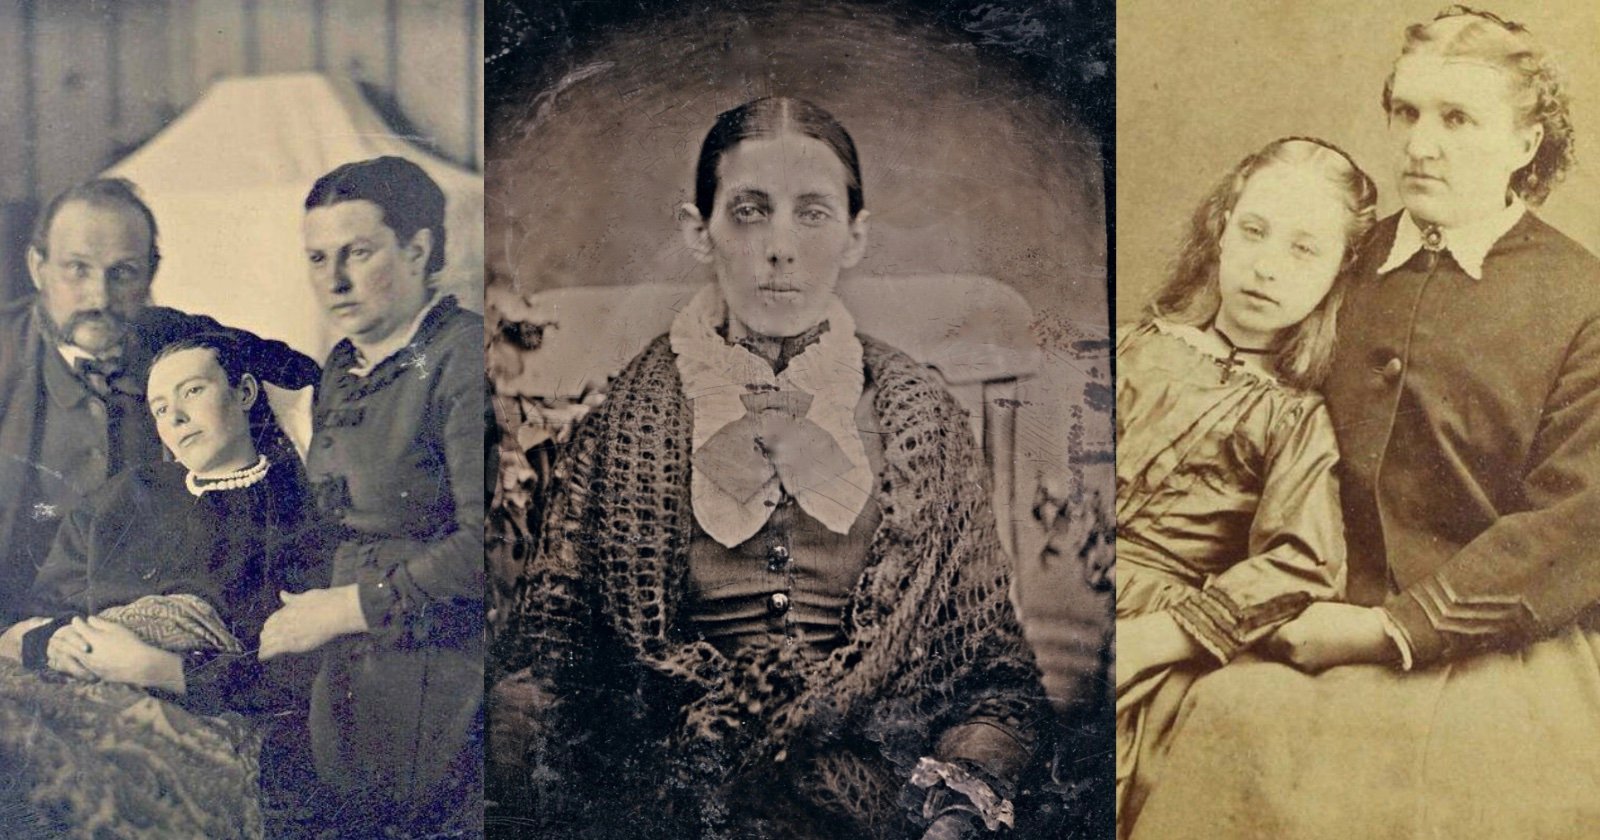  haunting victorian family photos show loved ones who 